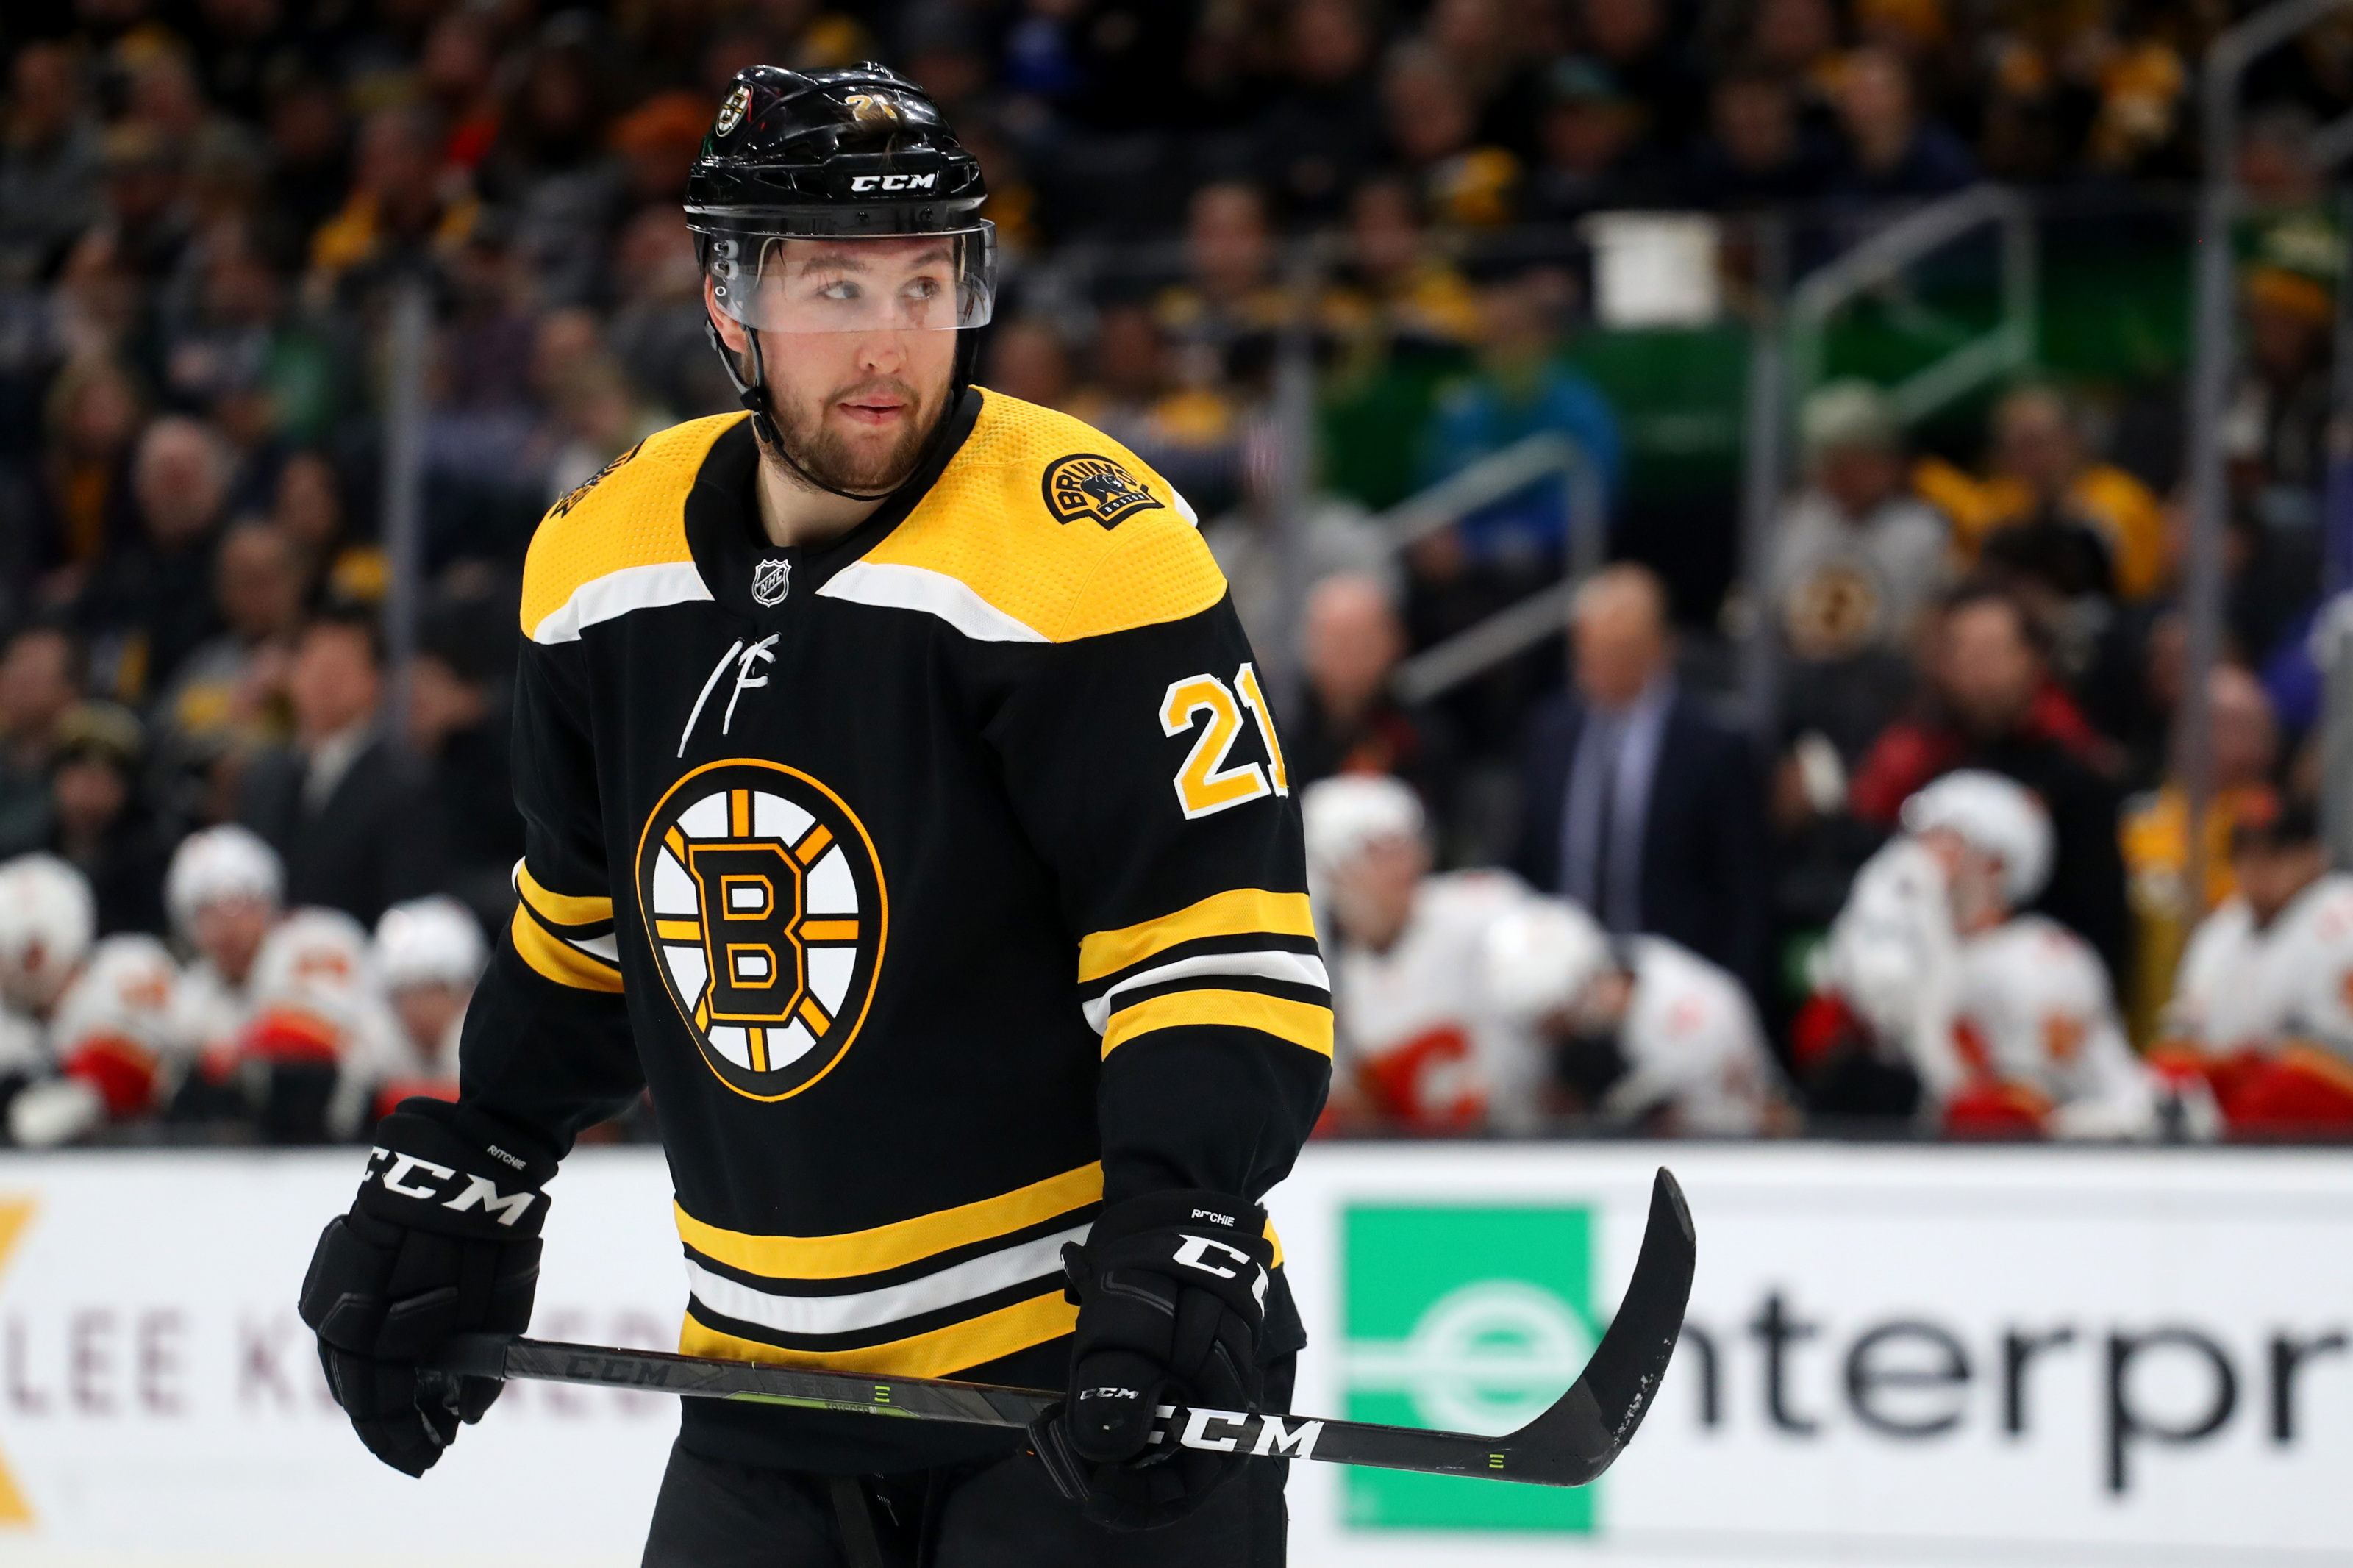 Loooch!' heads back to Boston to re-join Bruins